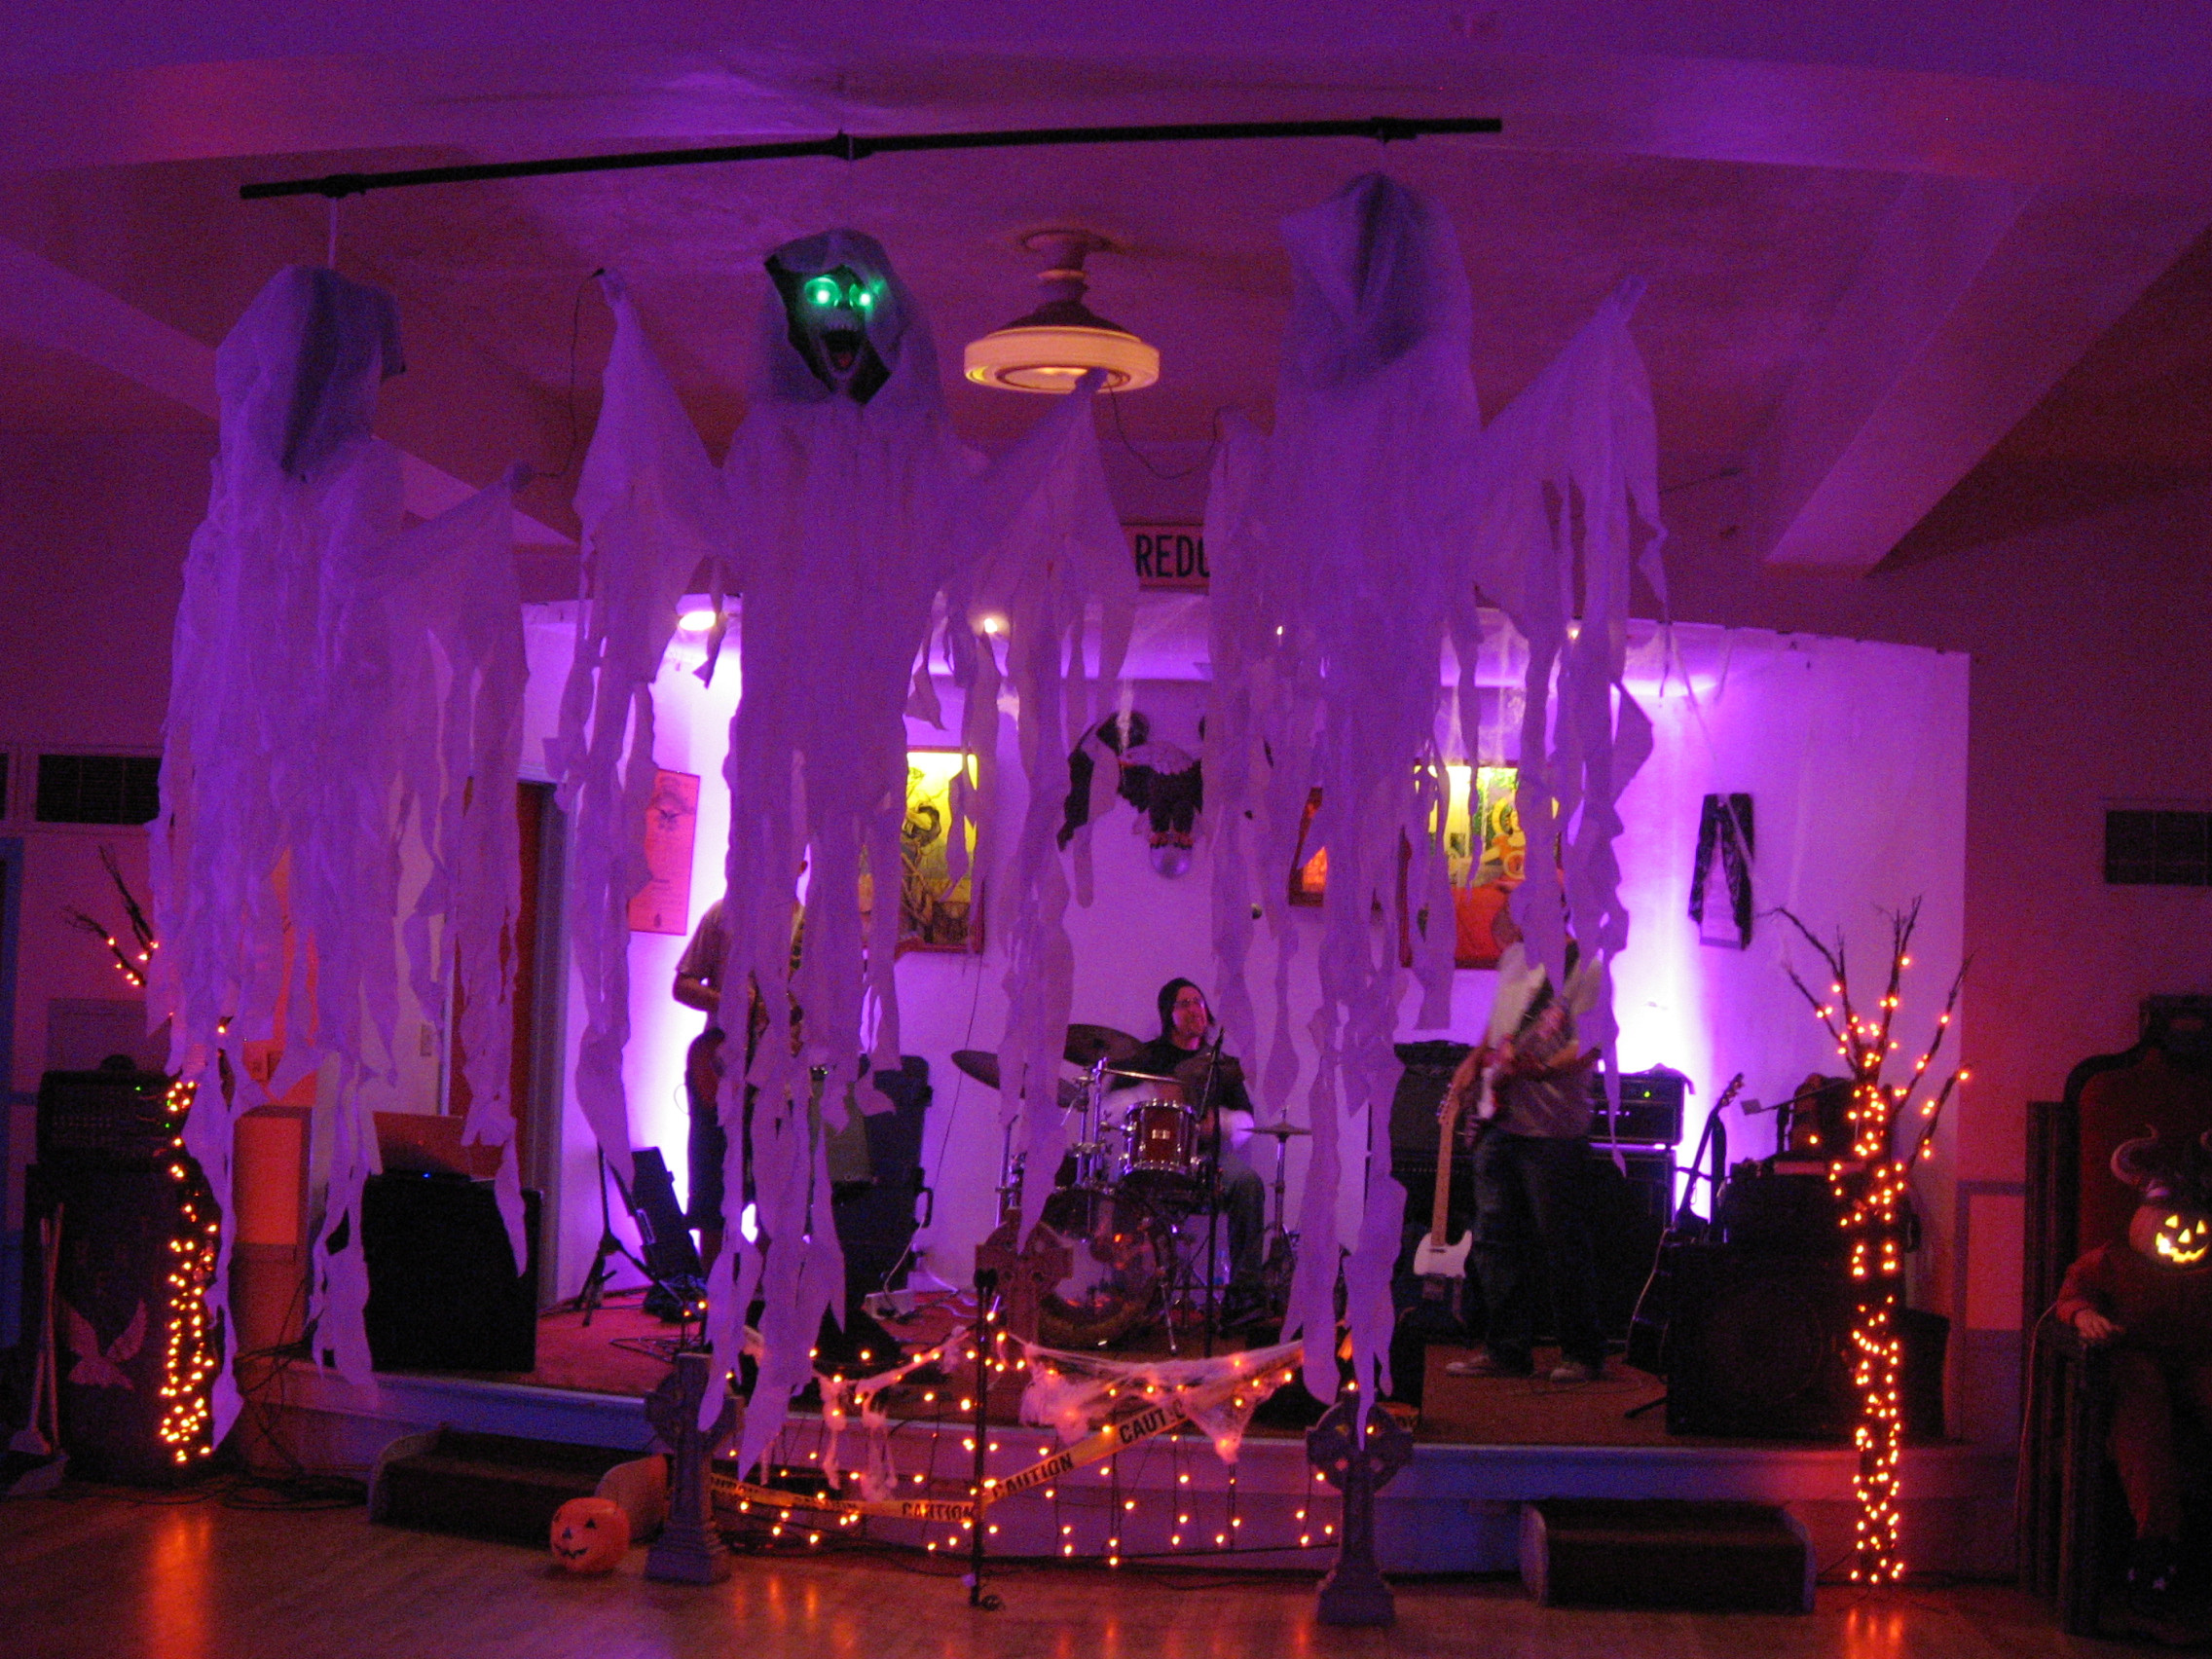 Halloween Party Decorating Ideas For Adults
 A Halloween Bash